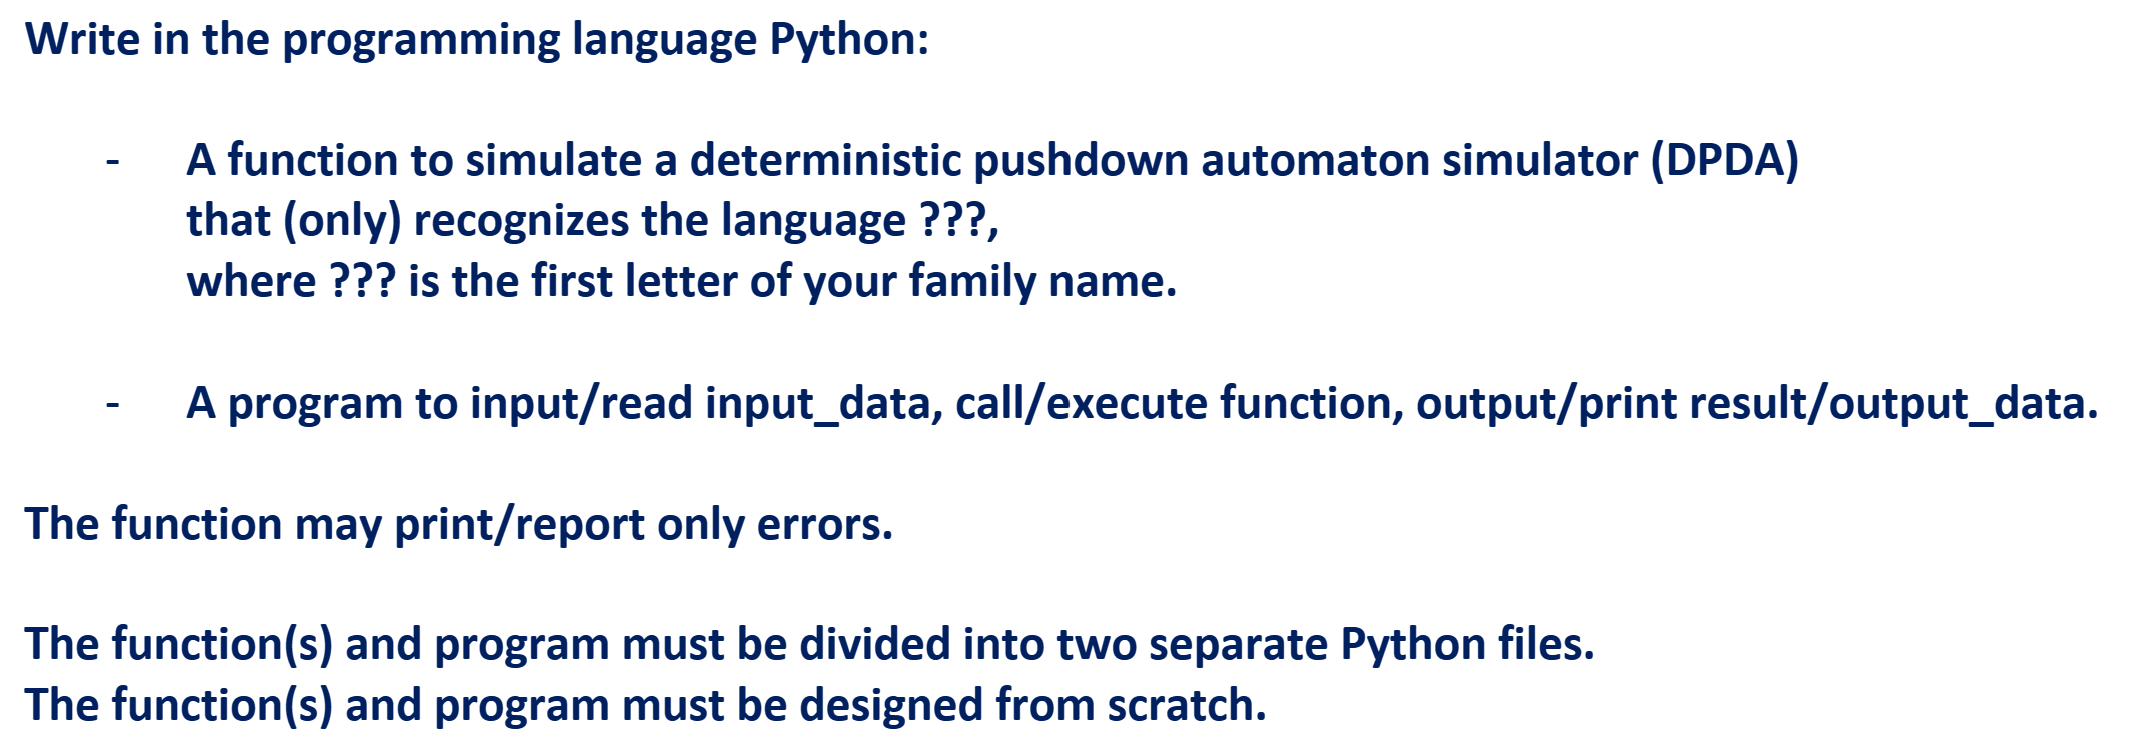 Write in the programming language Python: A function to simulate a deterministic pushdown automaton simulator